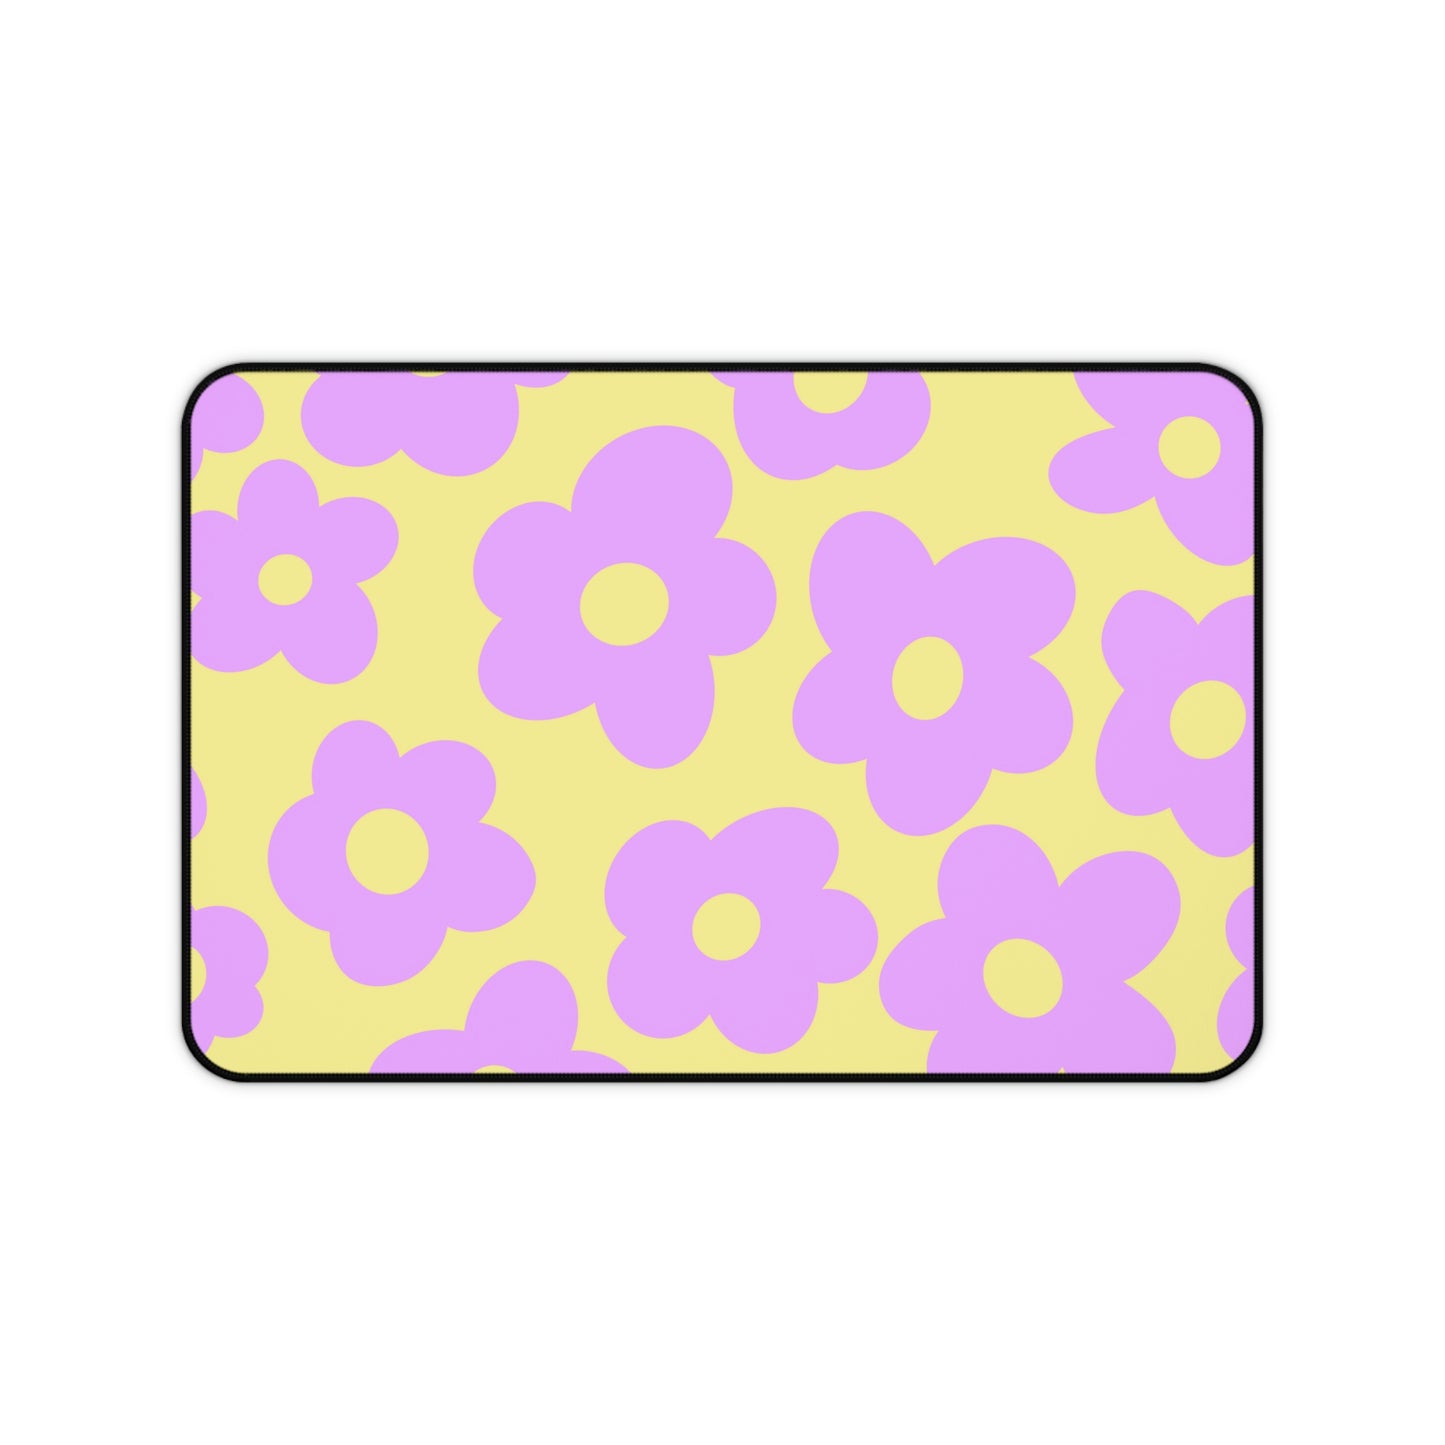 A 12" x 18" desk mat with purple flowers on a yellow background.